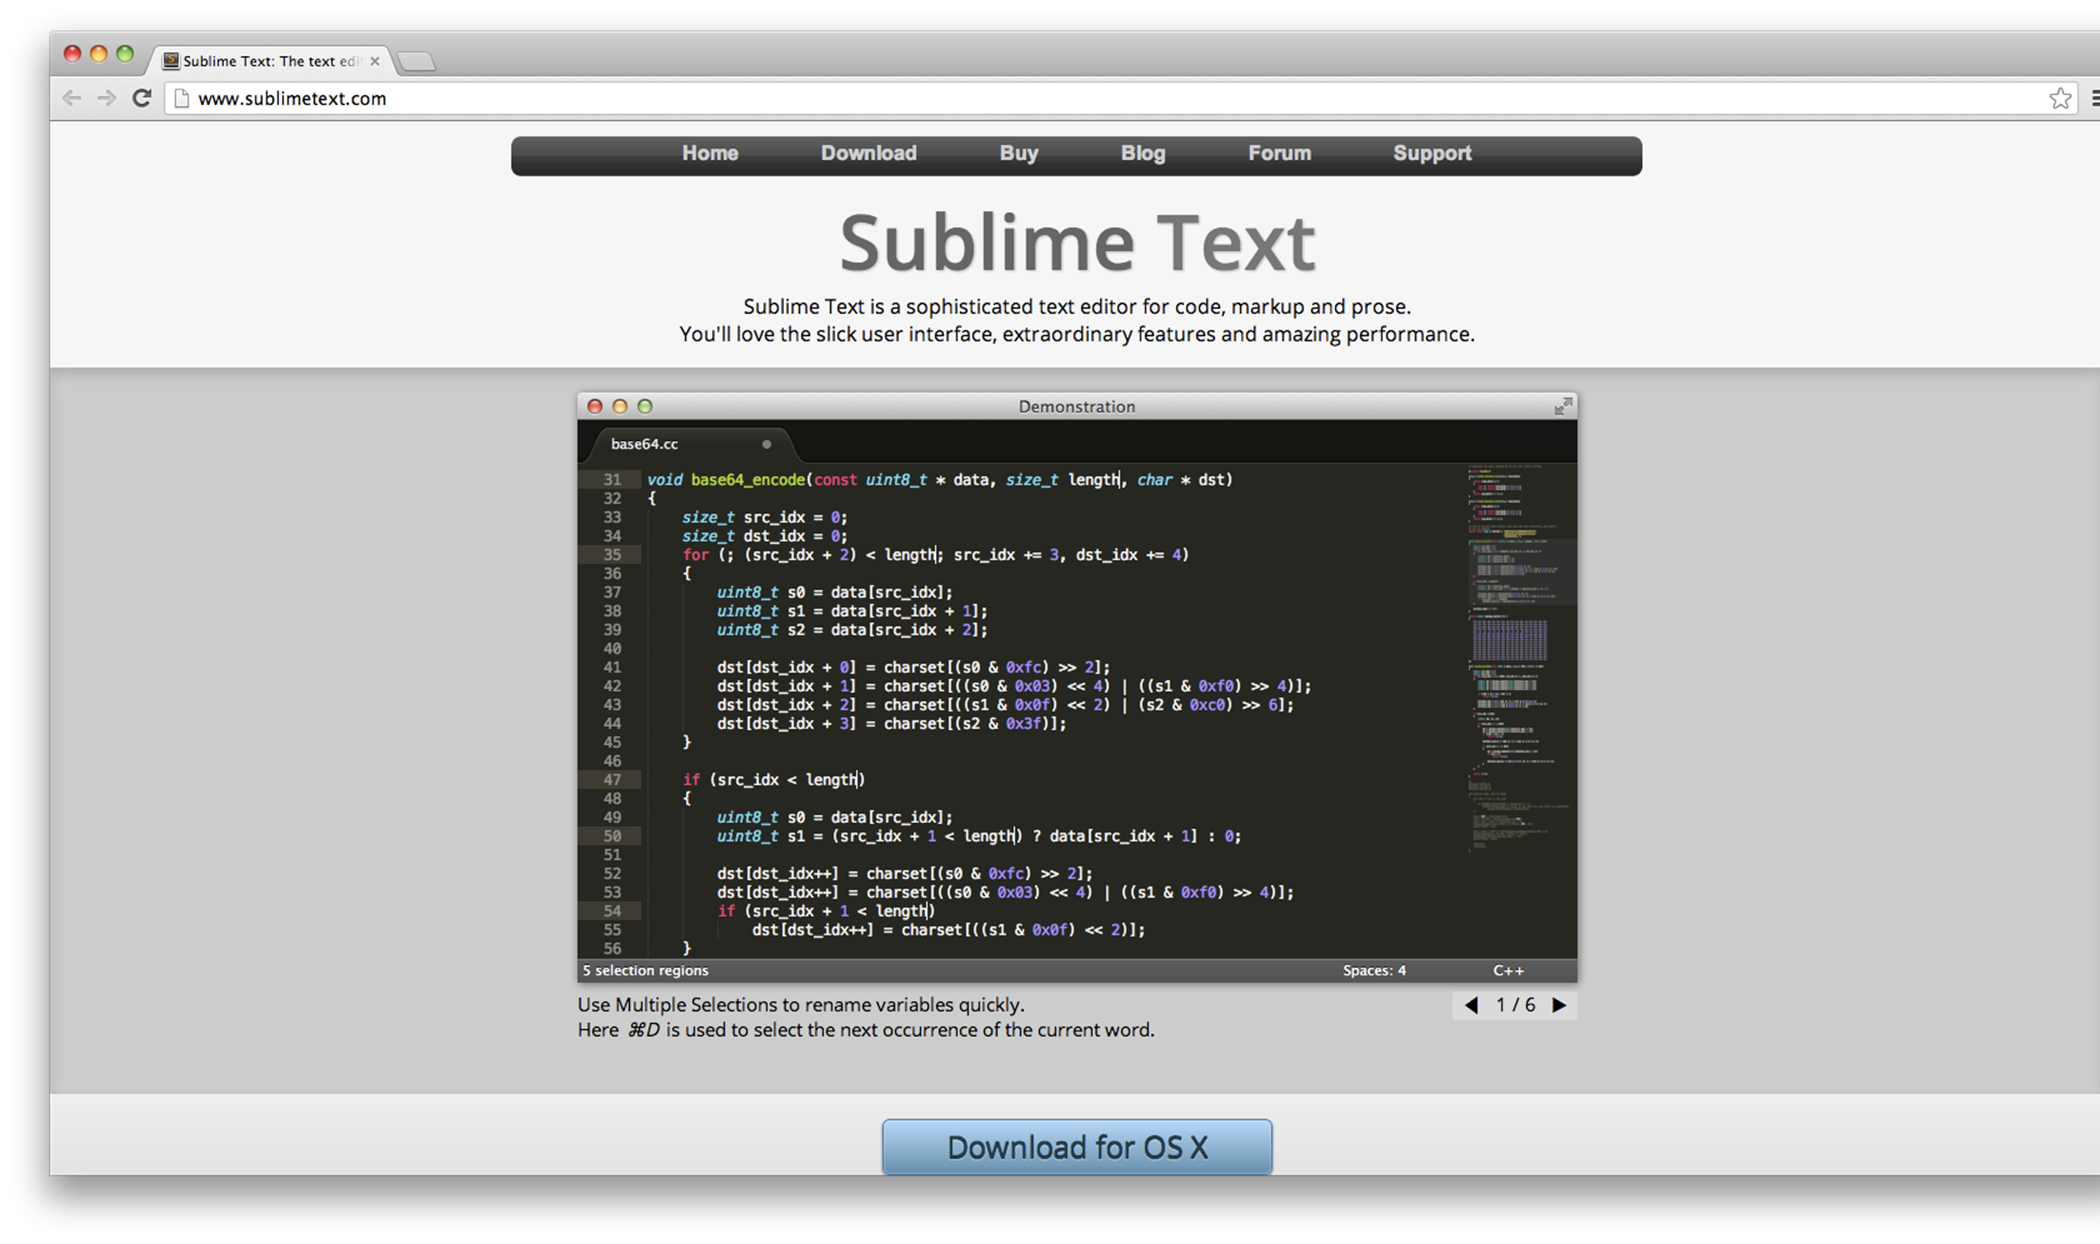 Sublime Text code editor home page.